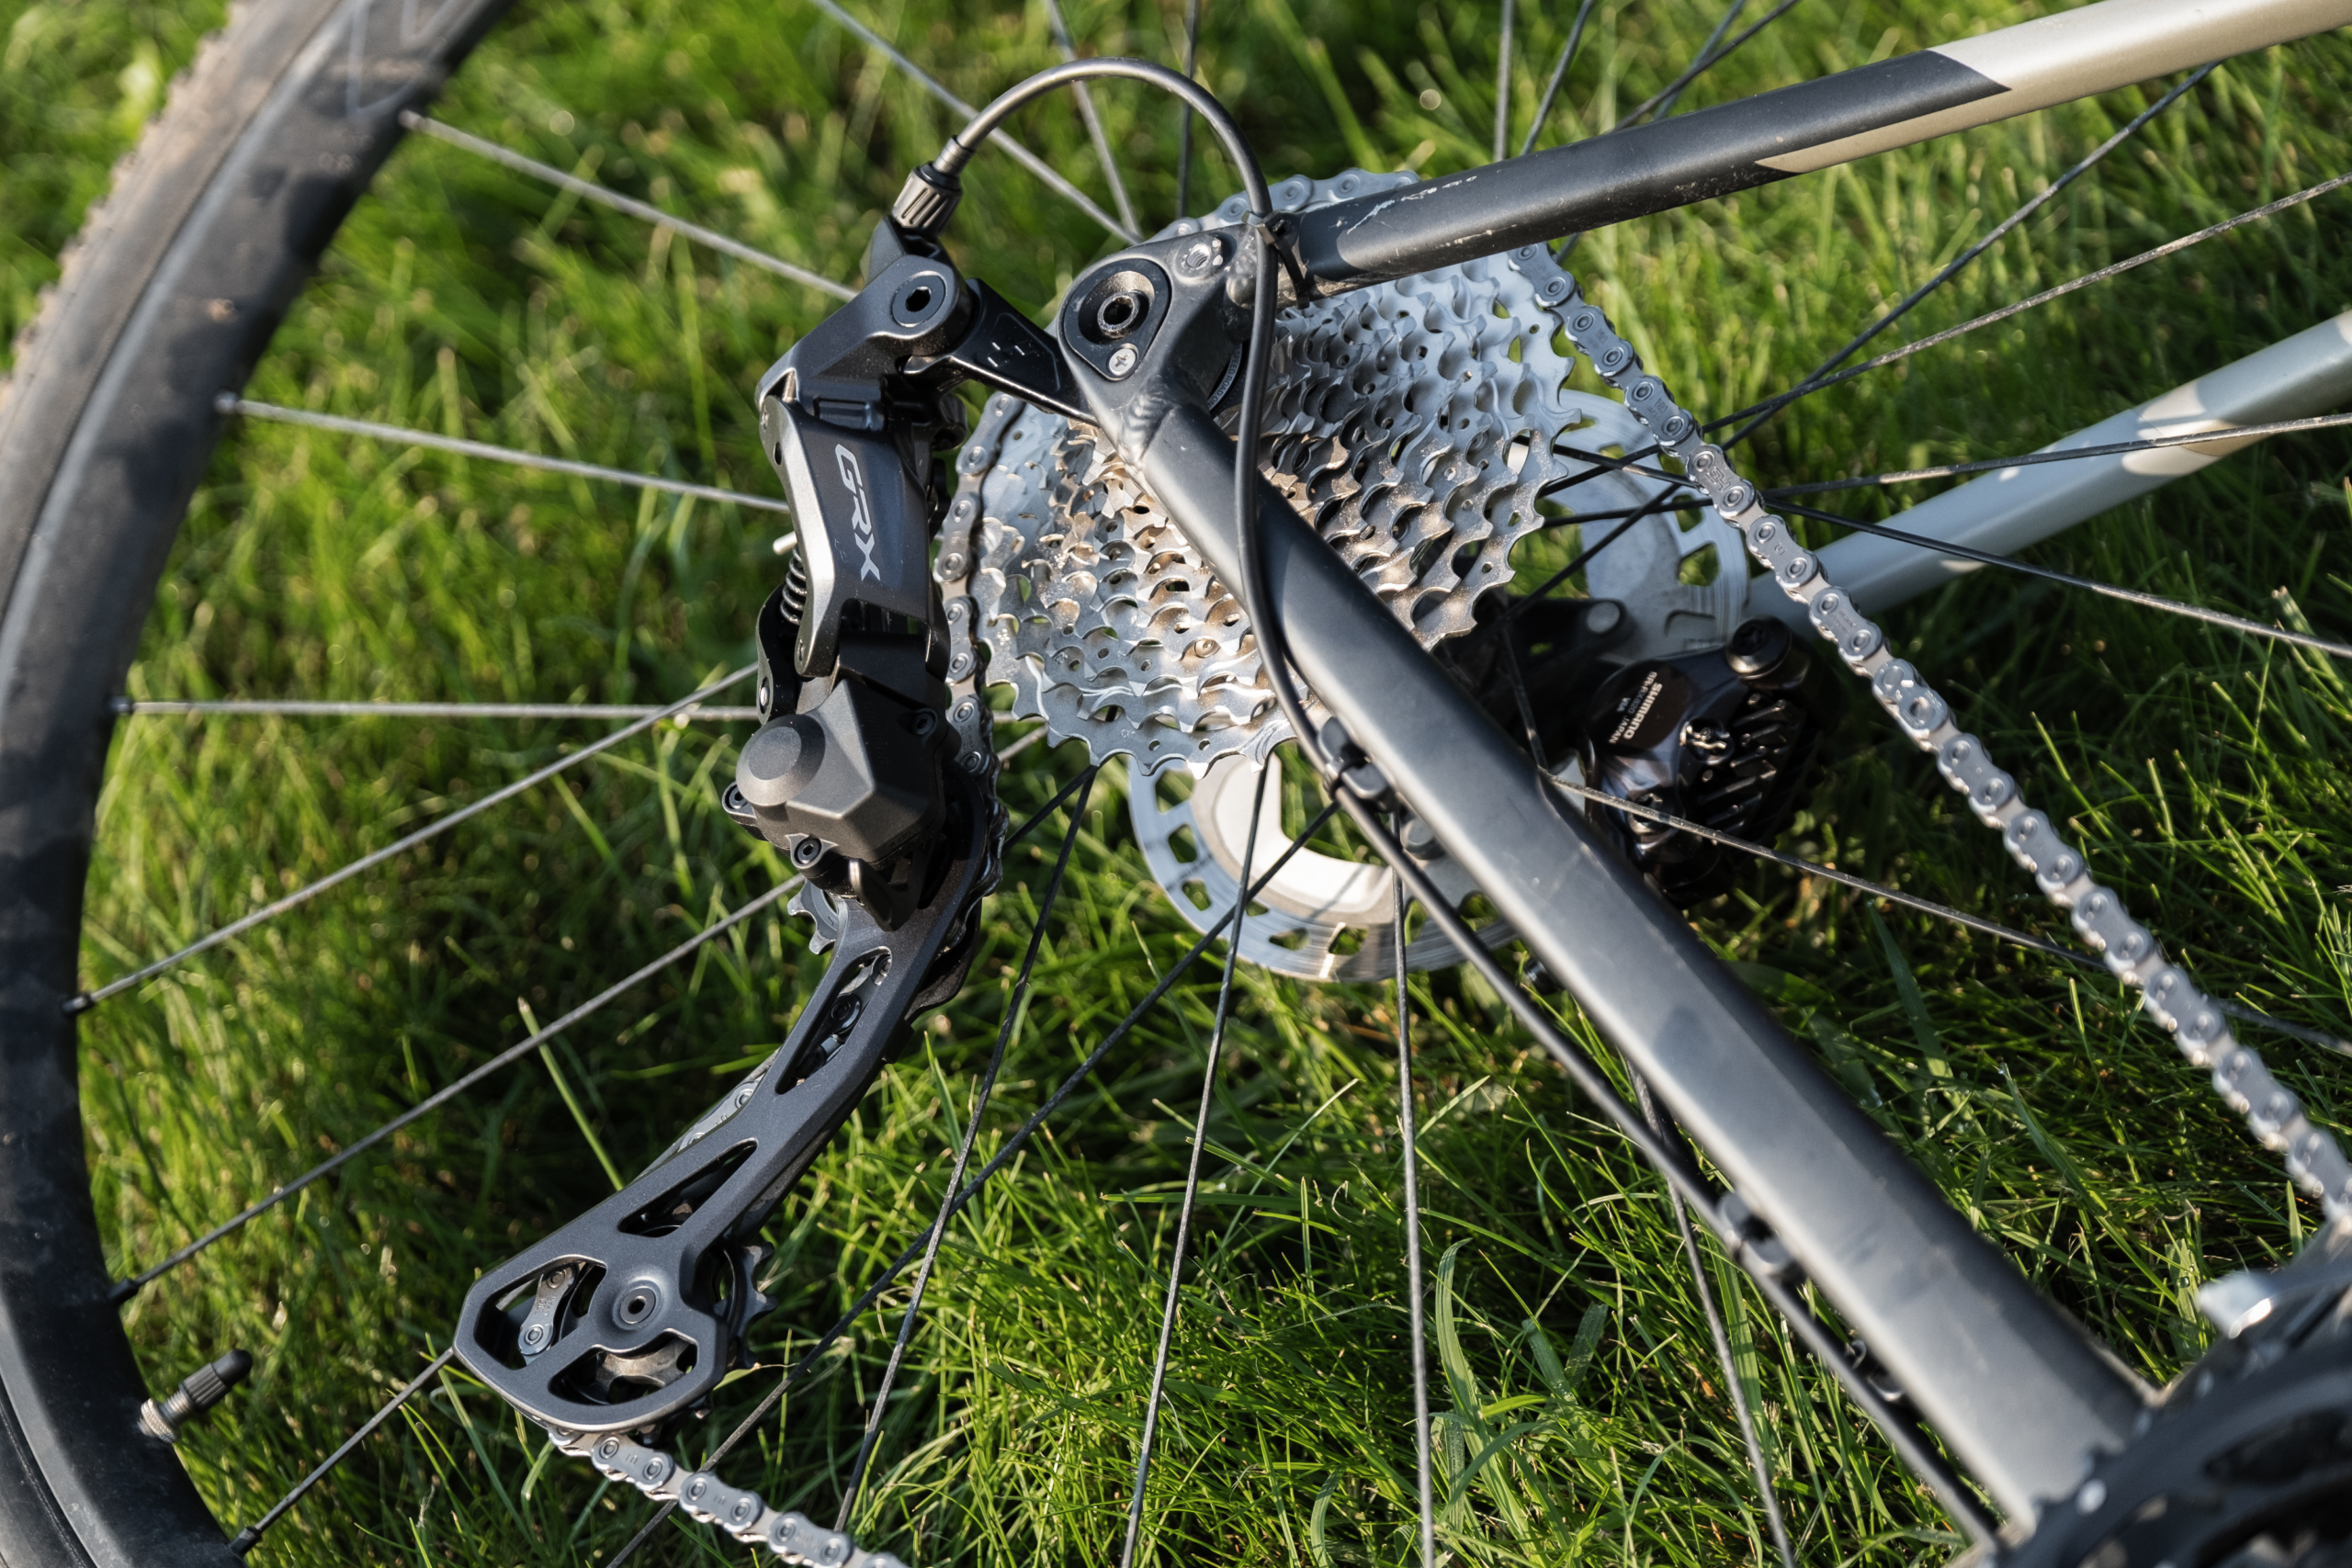 The new Shimano GRX 820 rear derailleur with chain and cassette